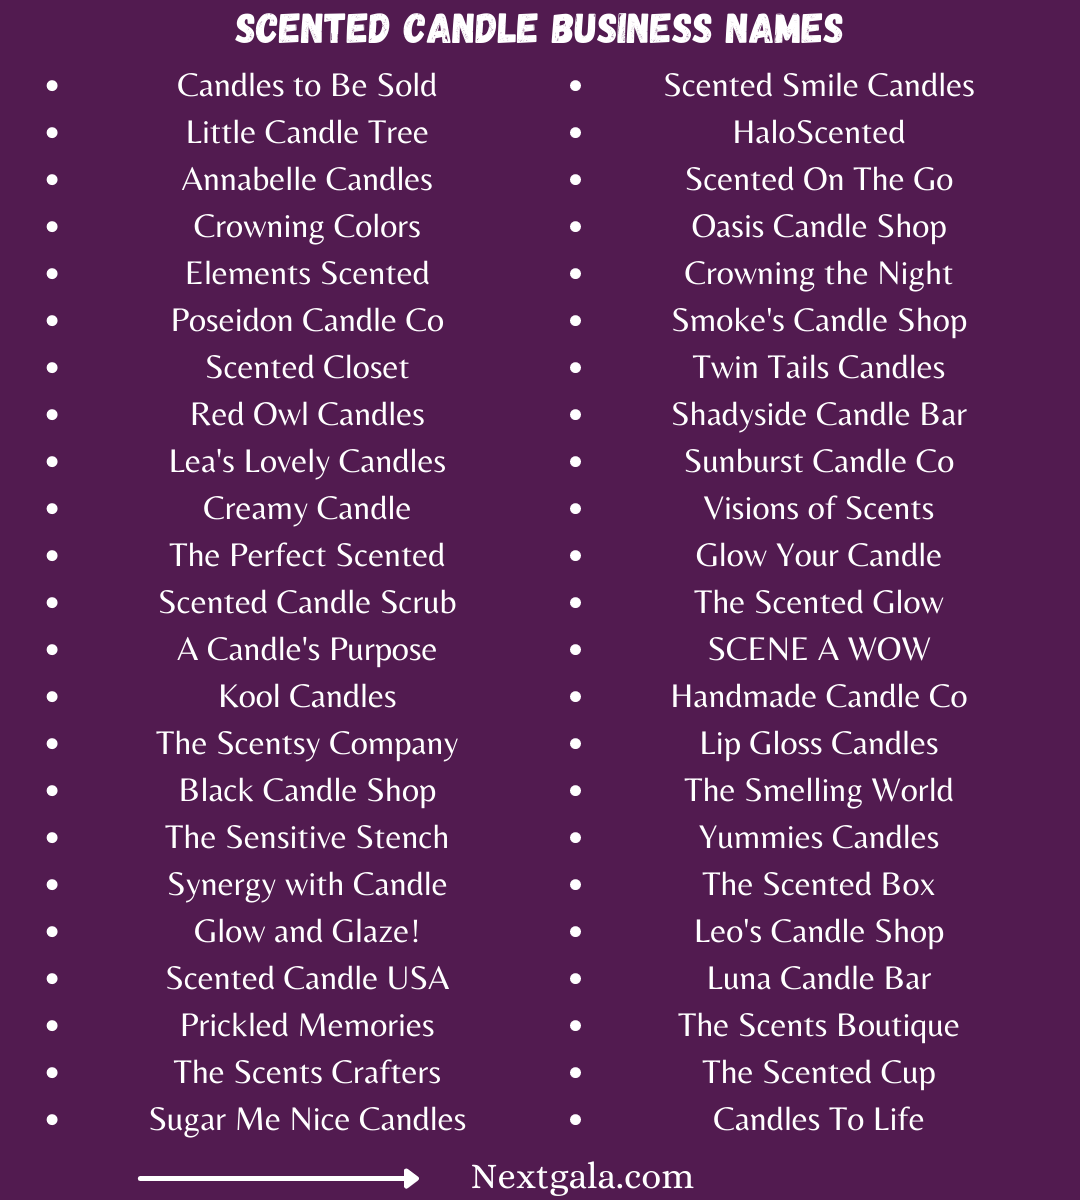 Scented Candle Business Names